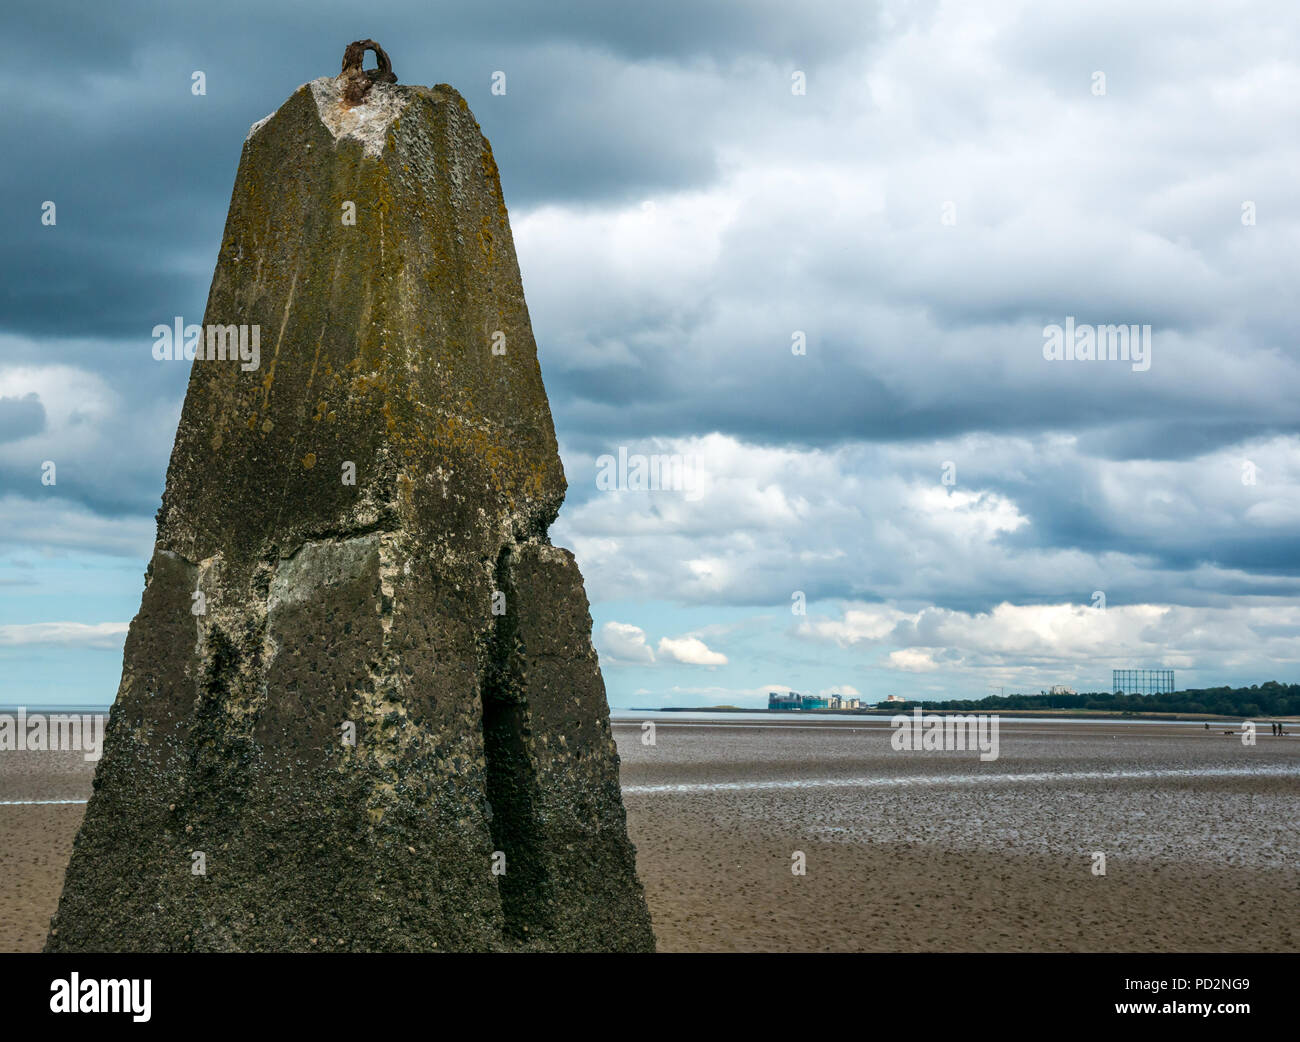 Remains of World War II concrete anti shipping barrier pylon in the Firth of Forth at low tide, Cramond, Edinburgh, Scotland, UK Stock Photo